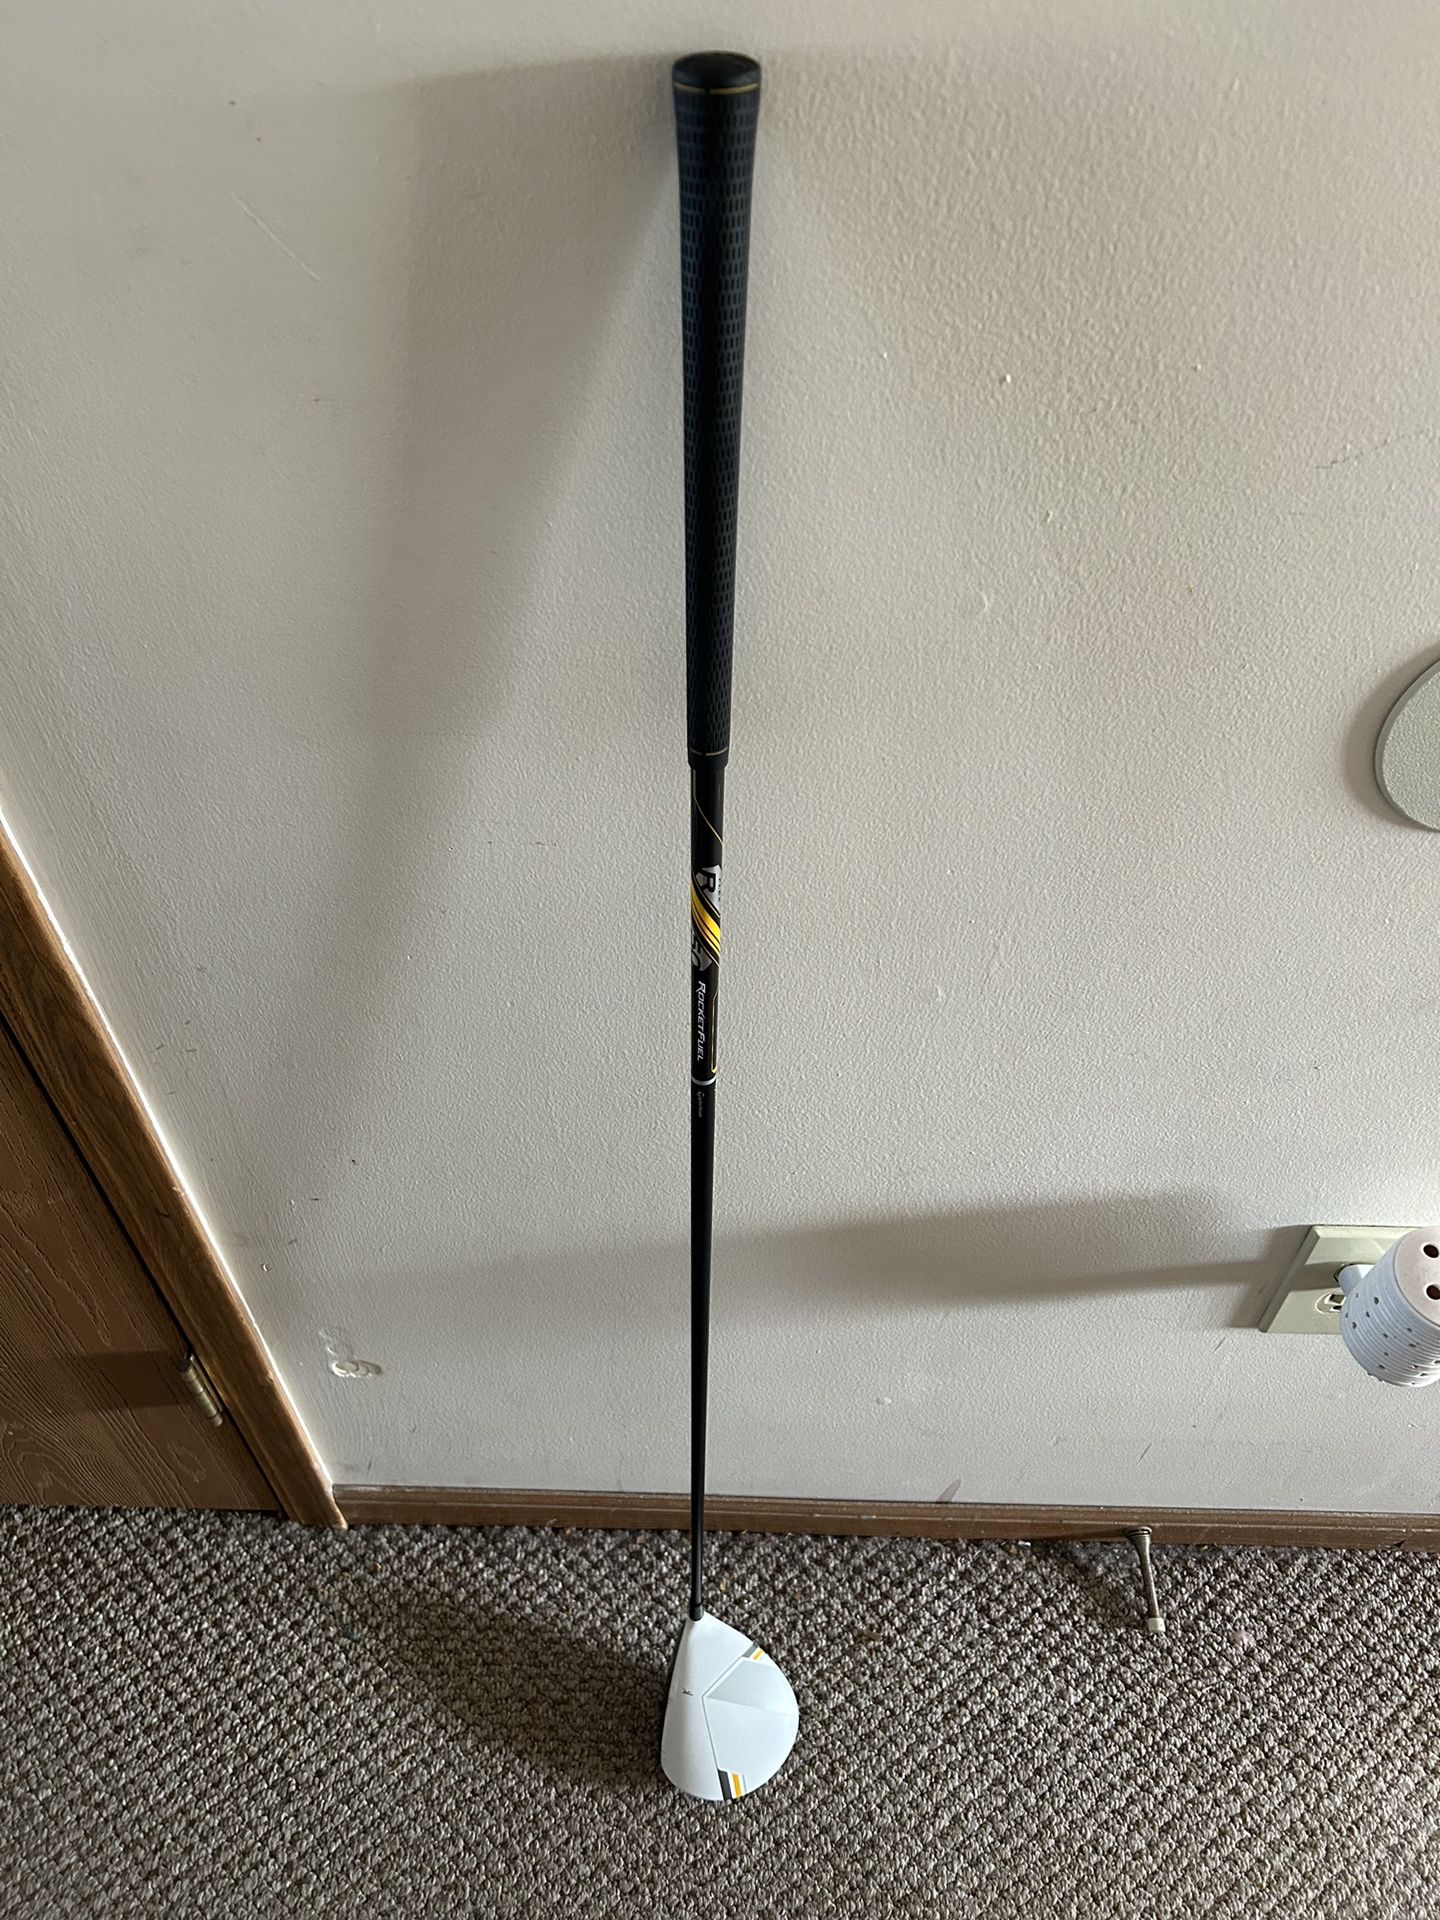 Taylormade Rocketballz Stage 2 Driver W/ head cover